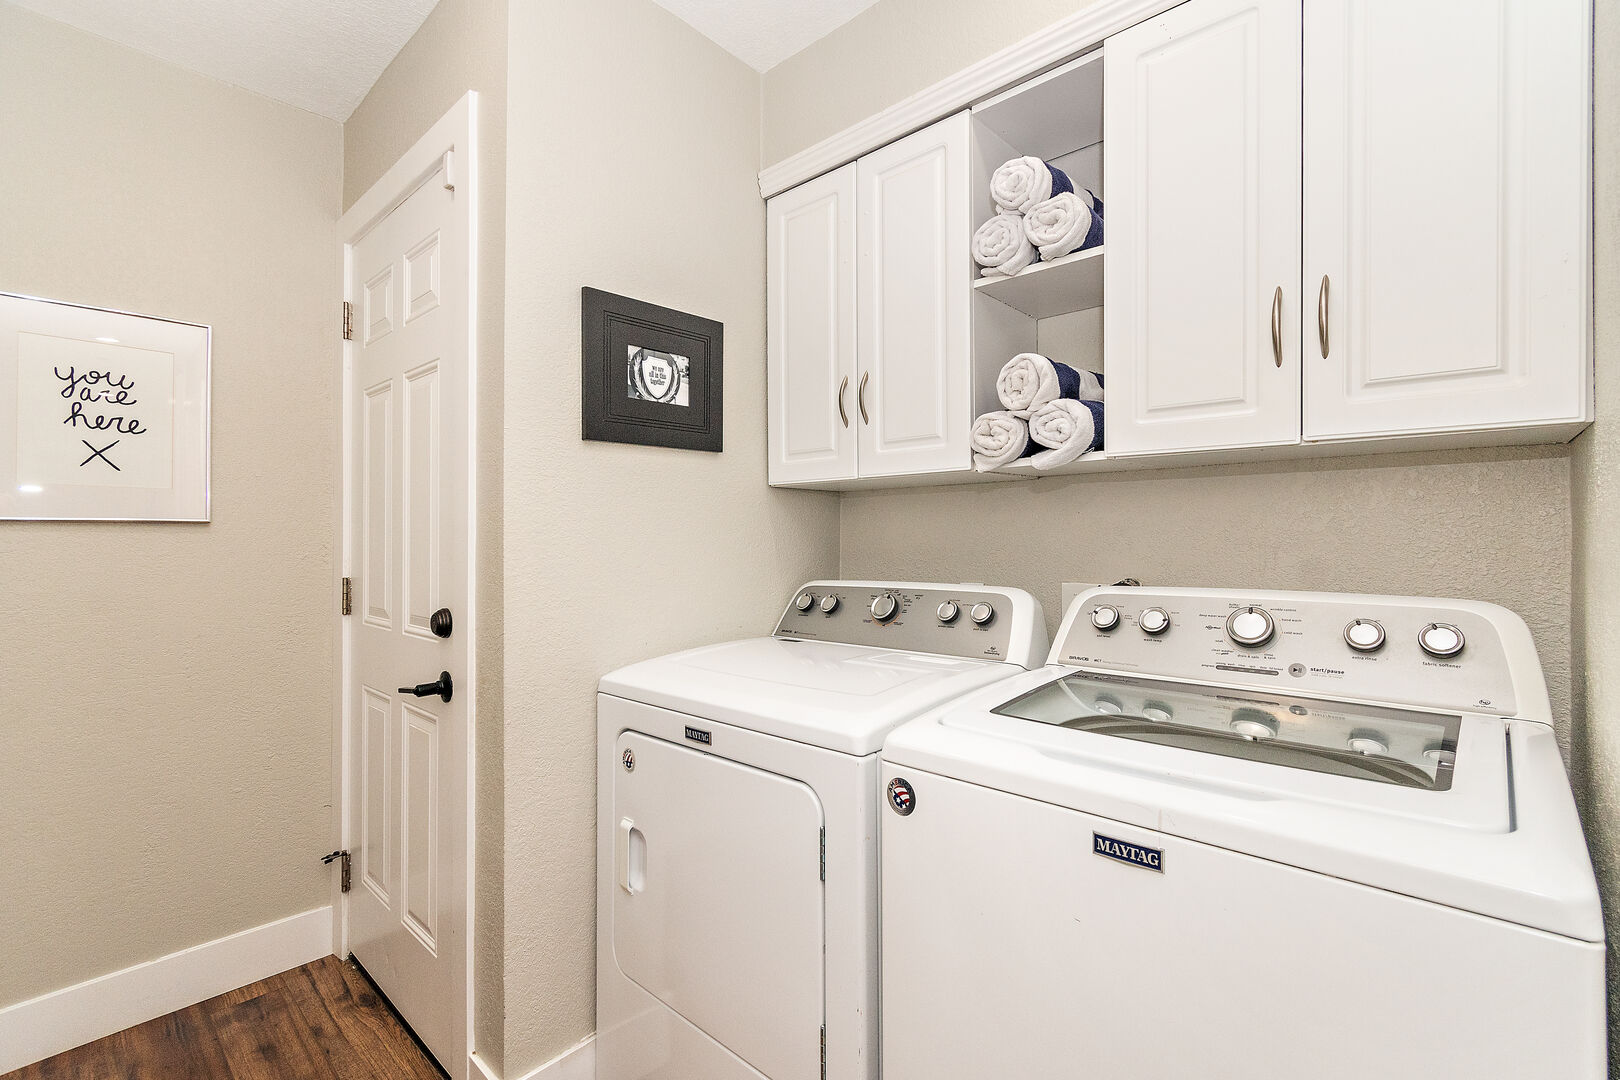 Fully equipped laundry room with washer, dryer, ironing board, iron, and laundry pods.